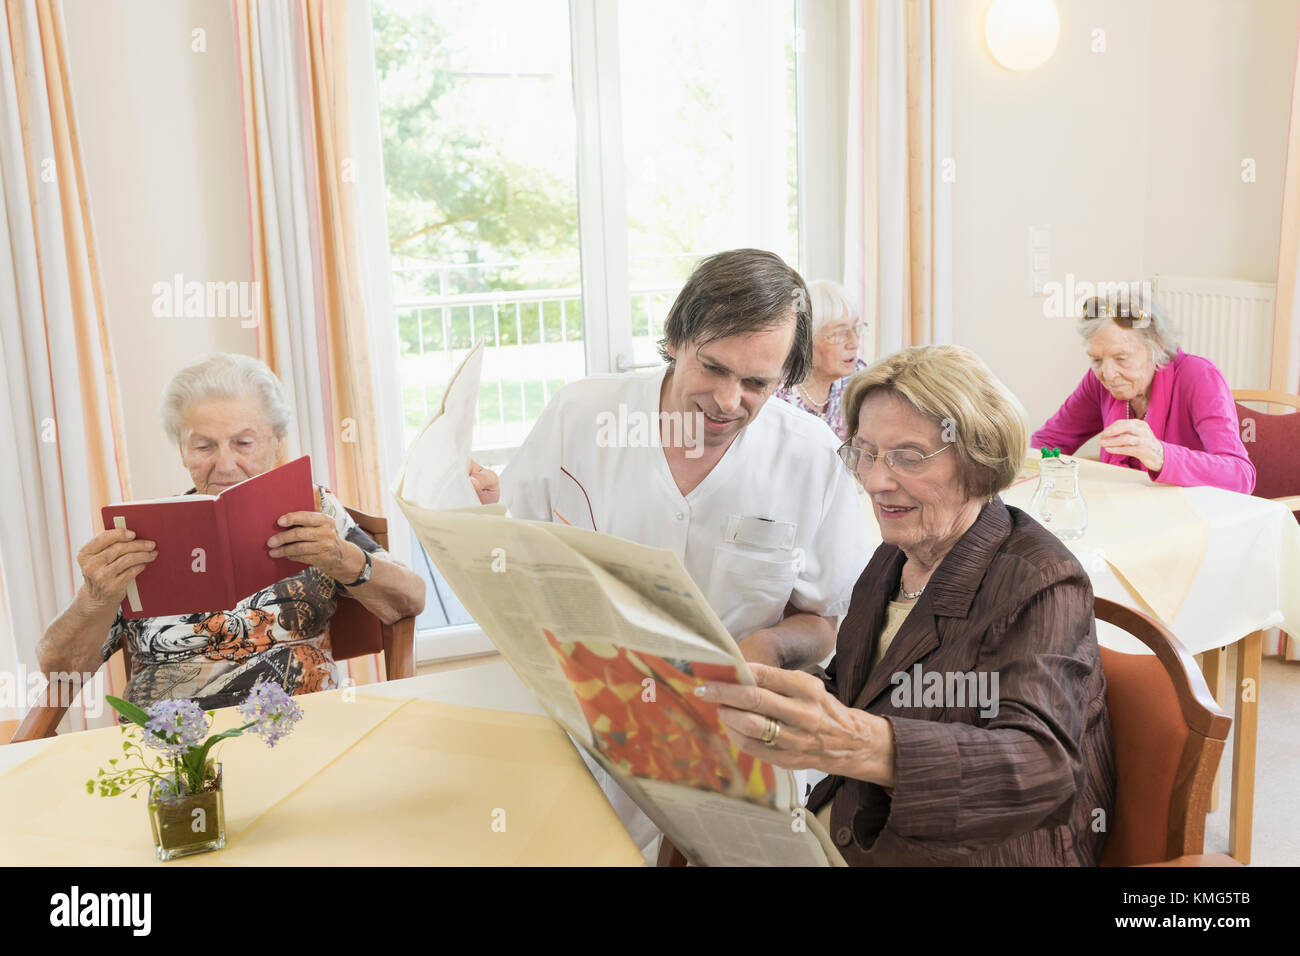 Caretaker reading newspaper with senior woman in rest home Stock Photo